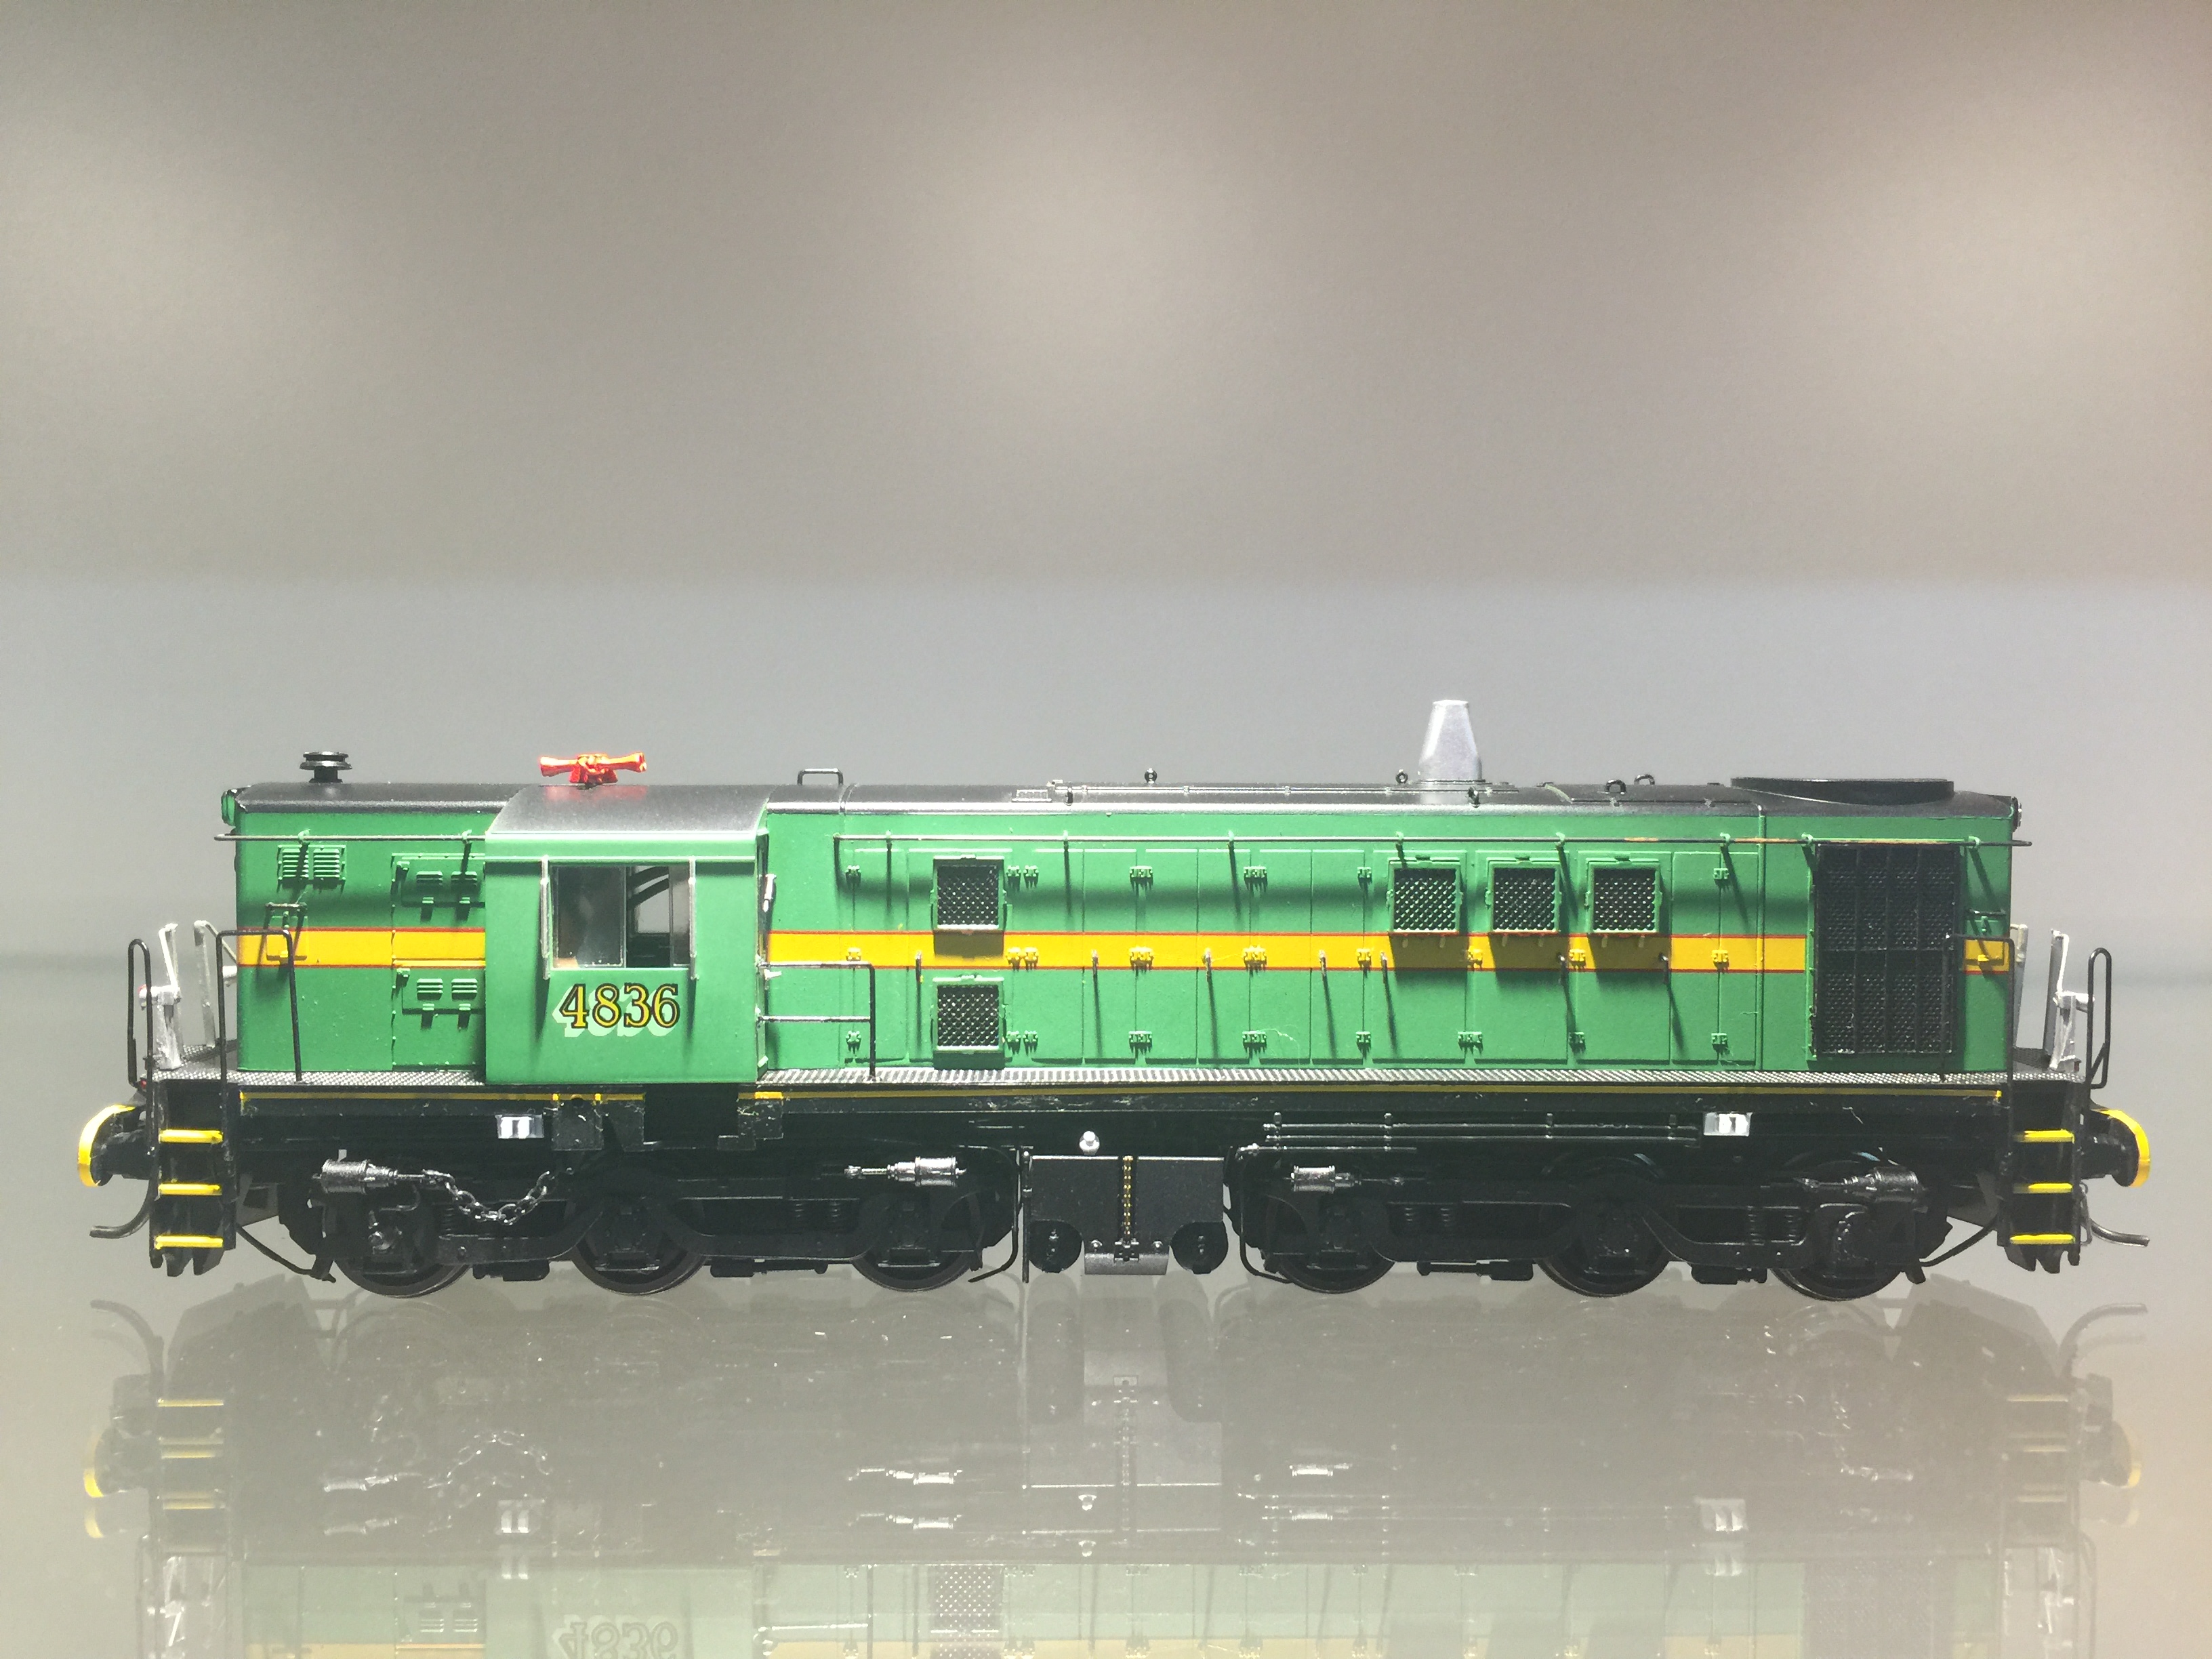 NEW ARRIVAL - TRAINORAMA 48 CLASS - : 4836 NO WRITING,  SPECIAL PRICE FOR ONLY $285 EACH